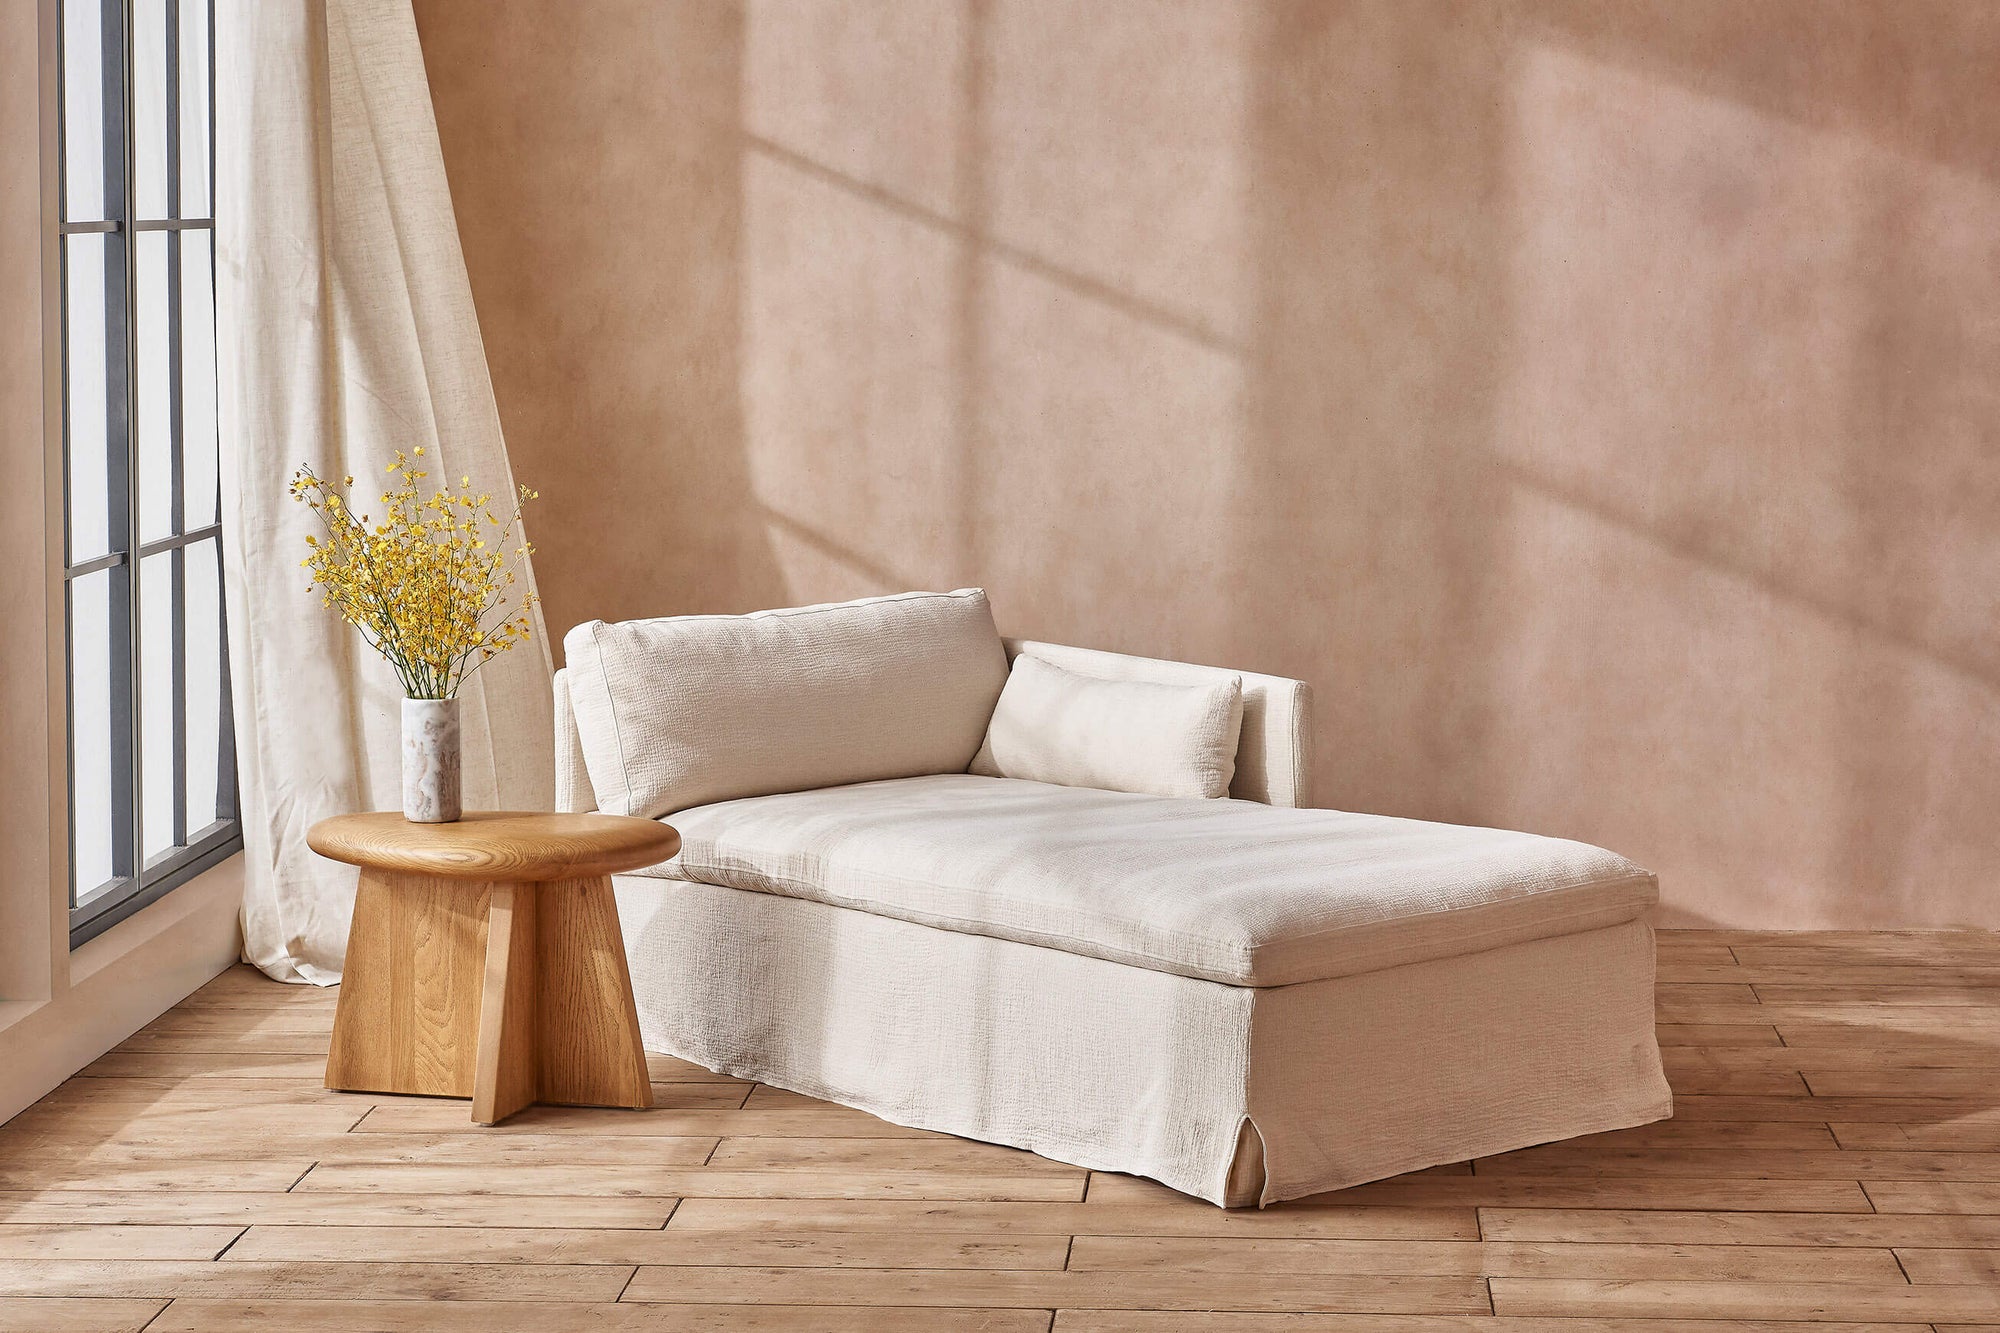 Gabriel Right Arm Facing Daybed in Corn Silk, a light beige Washed Cotton Linen, placed in a sunlit room next to a vase of flowers on a wooden end table